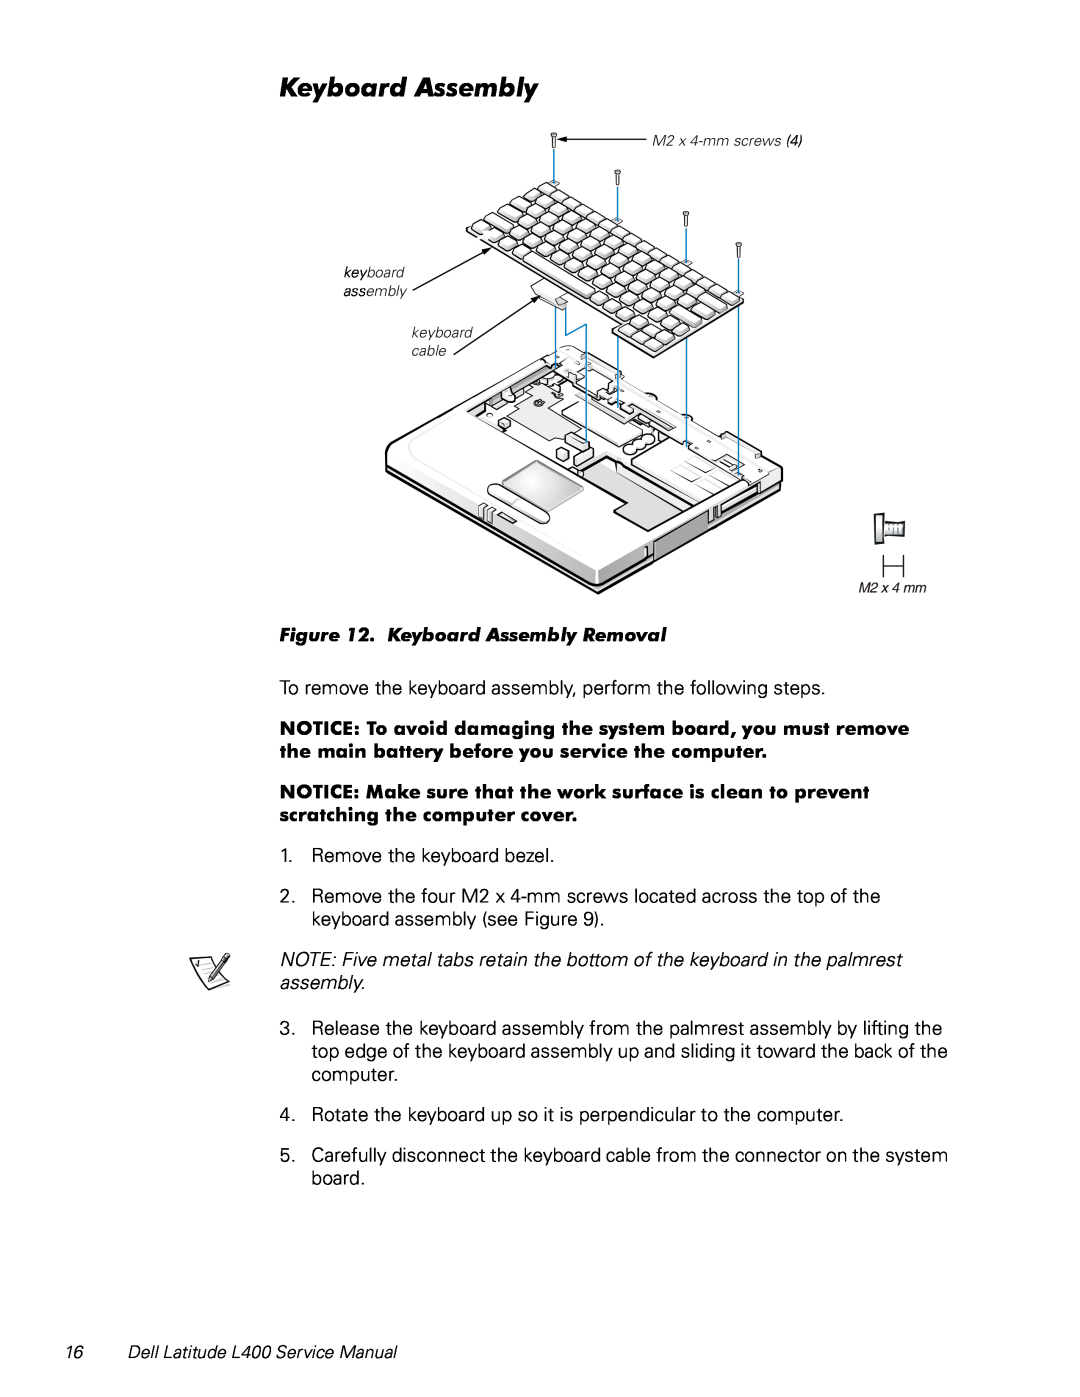 Dell L400 service manual Keyboard Assembly Removal 